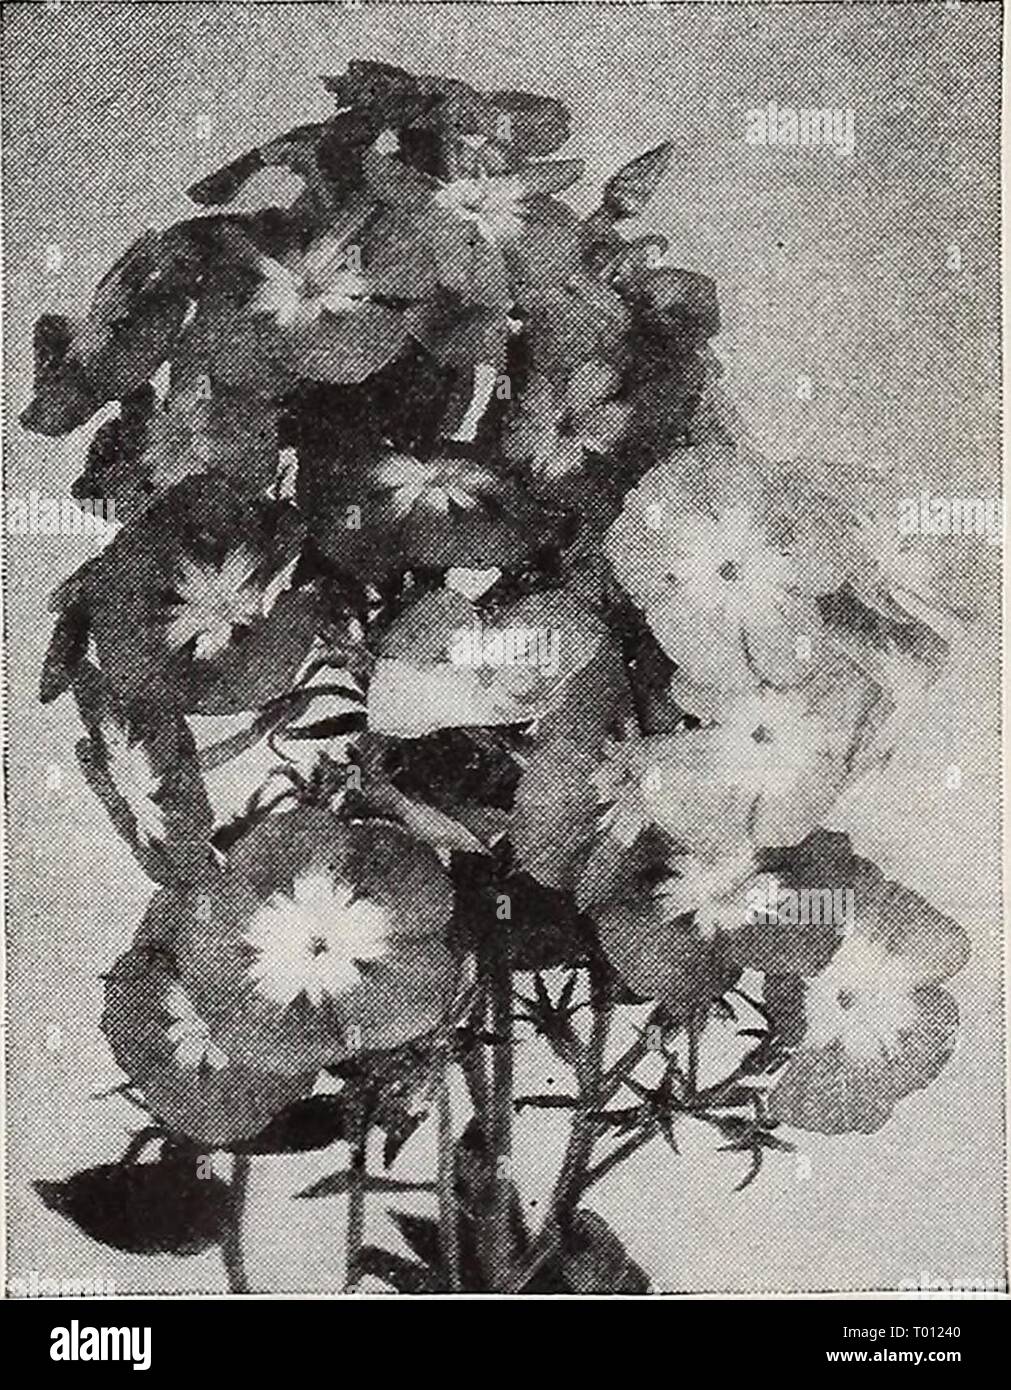 Dreer's garden book for 1940 . dreersgardenbook1940henr Year: 1940  SEEDLINGS ANMOAL STWIOE.    Phlox gigantea Colorful Annual Gigantea Phlox ® 3430 Art Shades. E.xtra-large blooms com- bining into impressive well-rormded flower heads representing many lovely art colors. Pkt. 15c; special pkt. 60c; i oz. §1.00. 3427 Salmon Glory. Exceptionally large florets of rich salmon-pink with large creamy white eye. Blooms freely and continuously. Pkt. 20c; special pkt. 75c. 1 All Flower Seeds ar sent POSTPAID Stock Photo